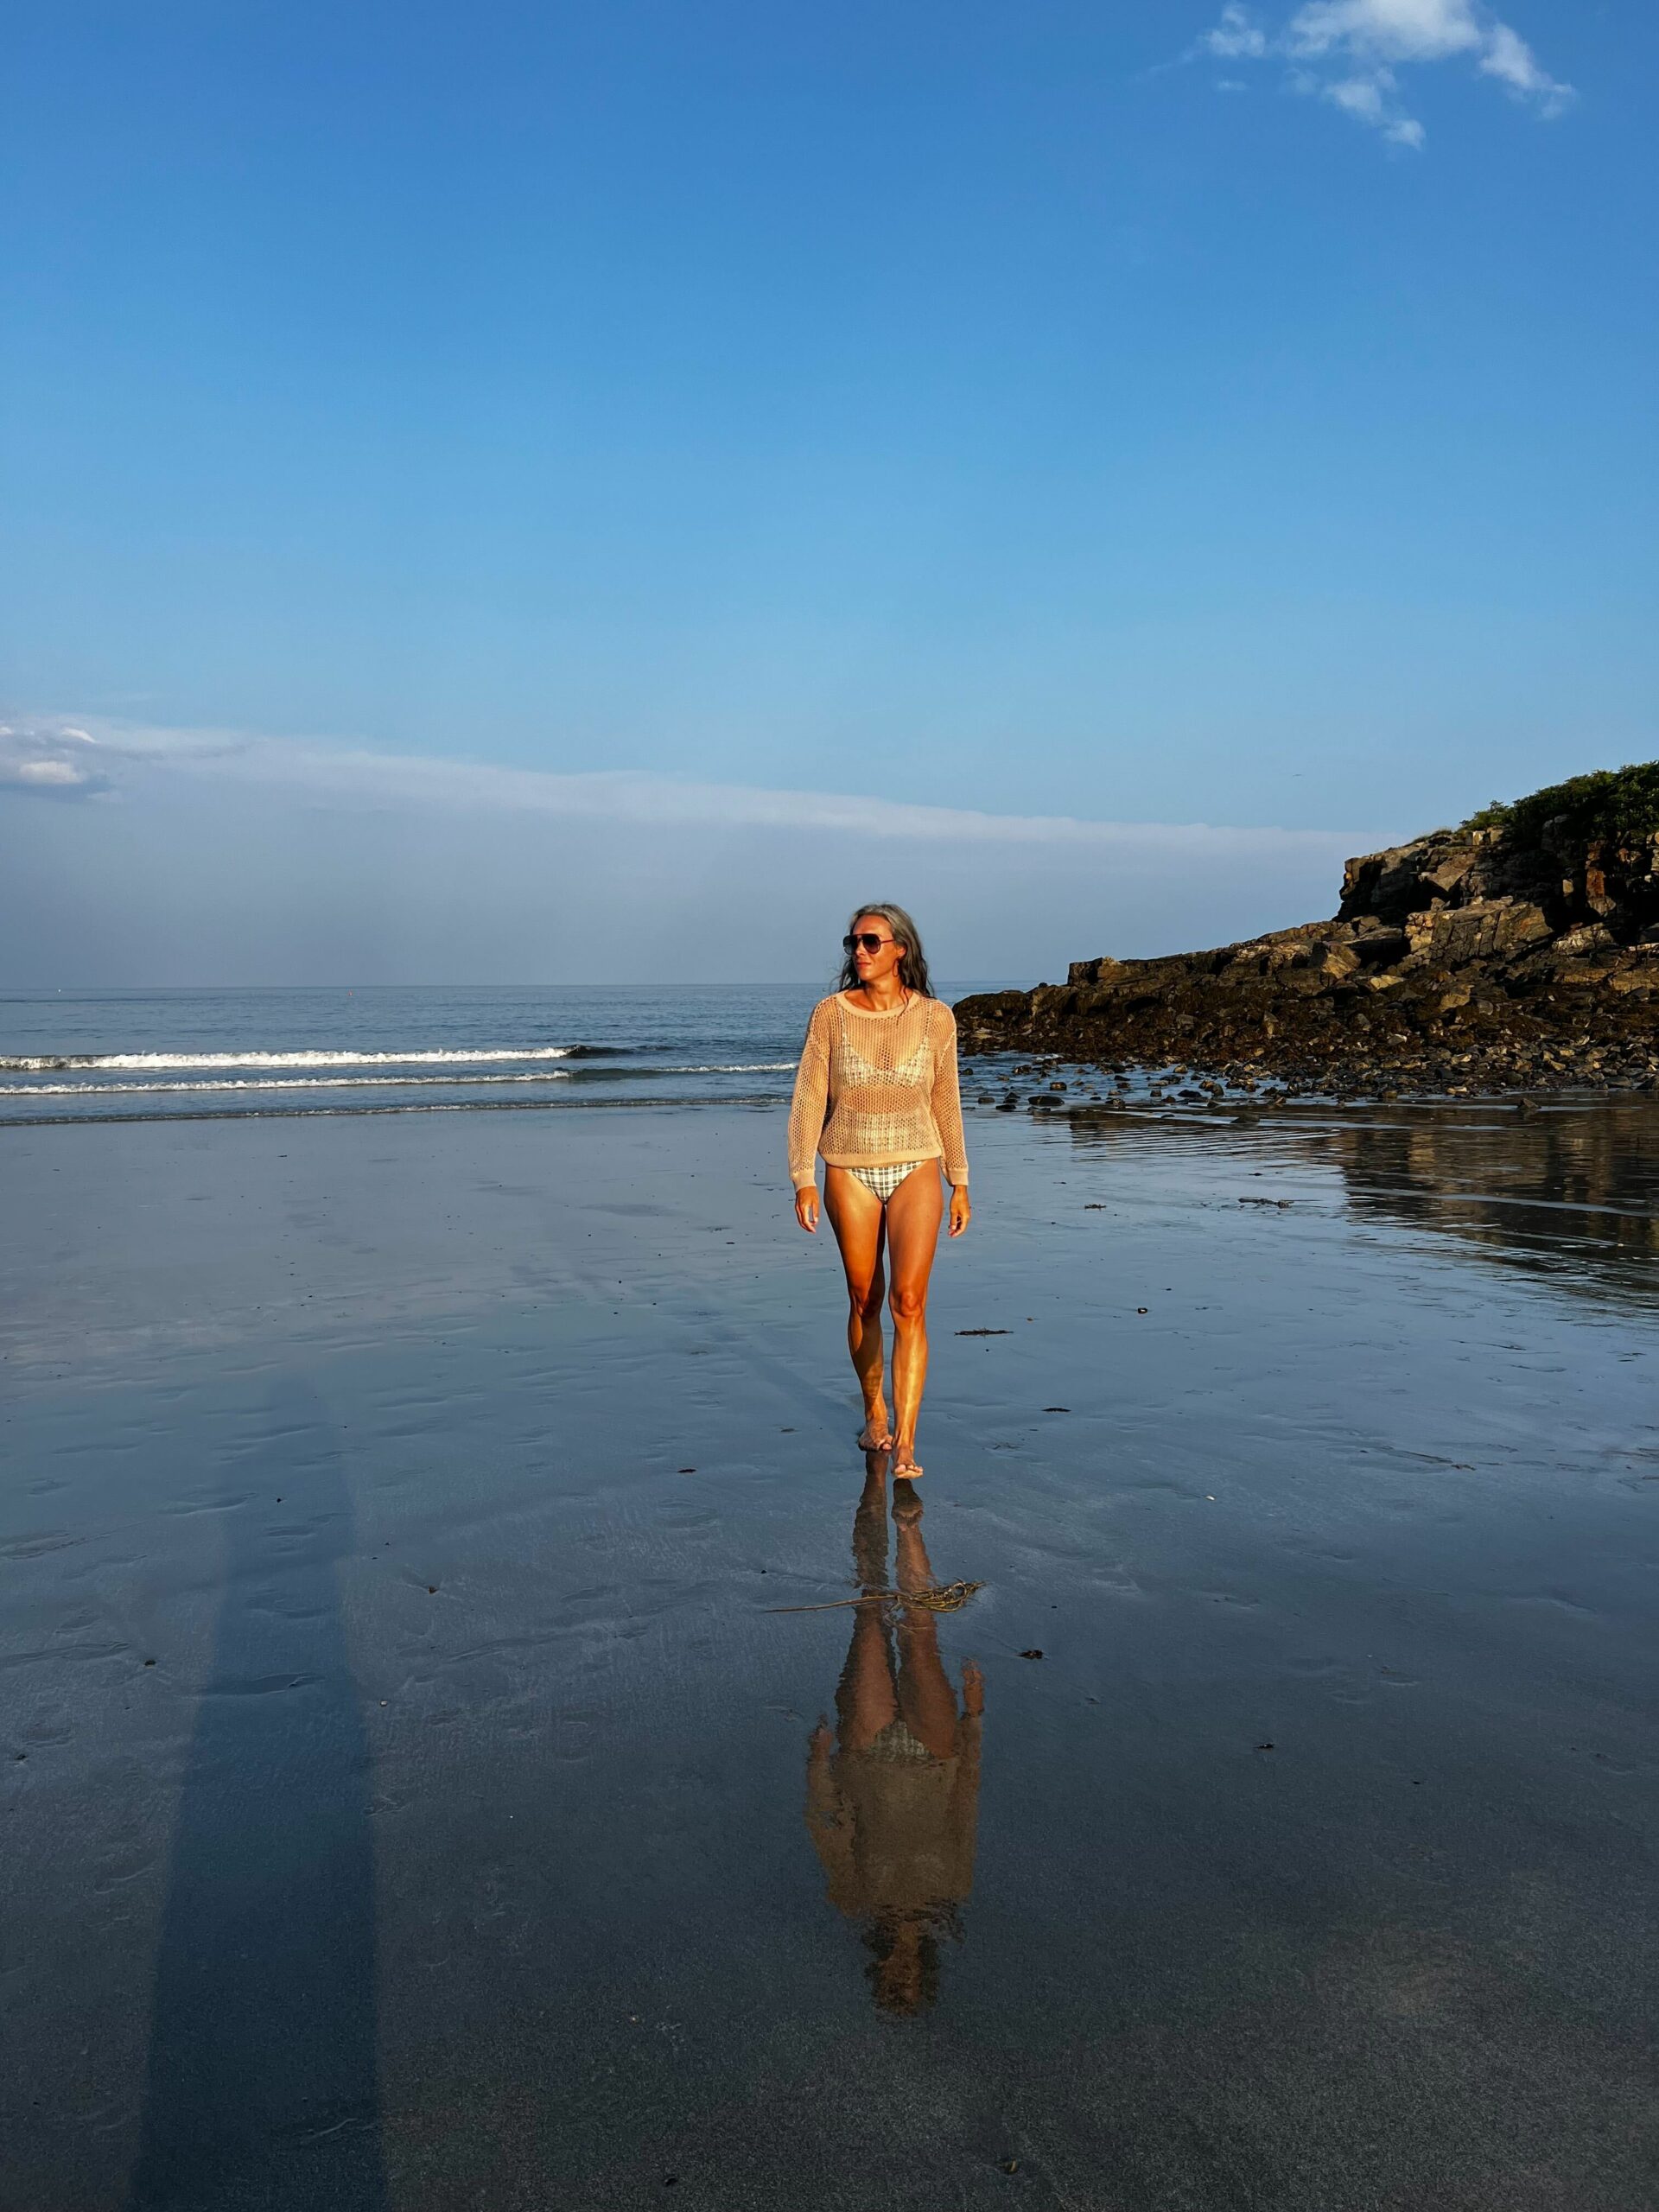 A woman walks on the beach in a sustainable coverup.